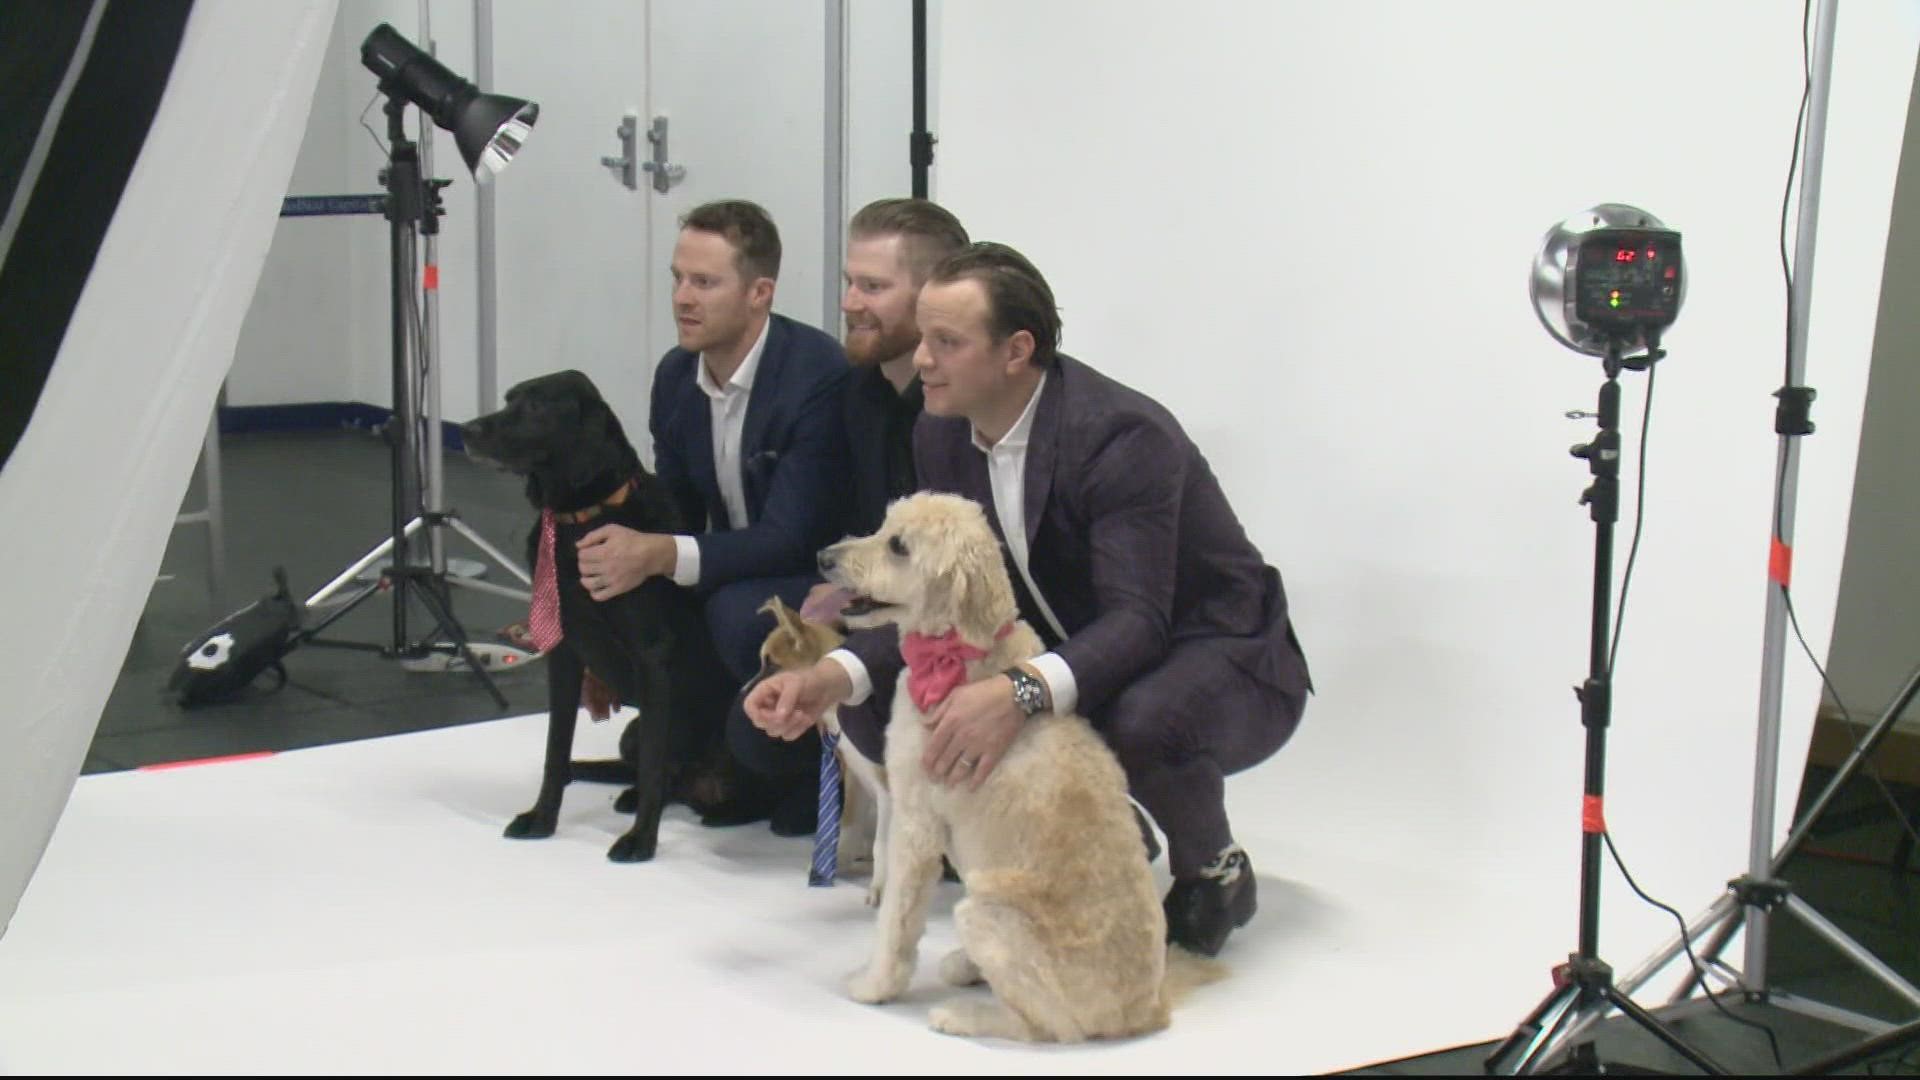 The 2023 Caps Canine Calendars will be available for sale later this fall online